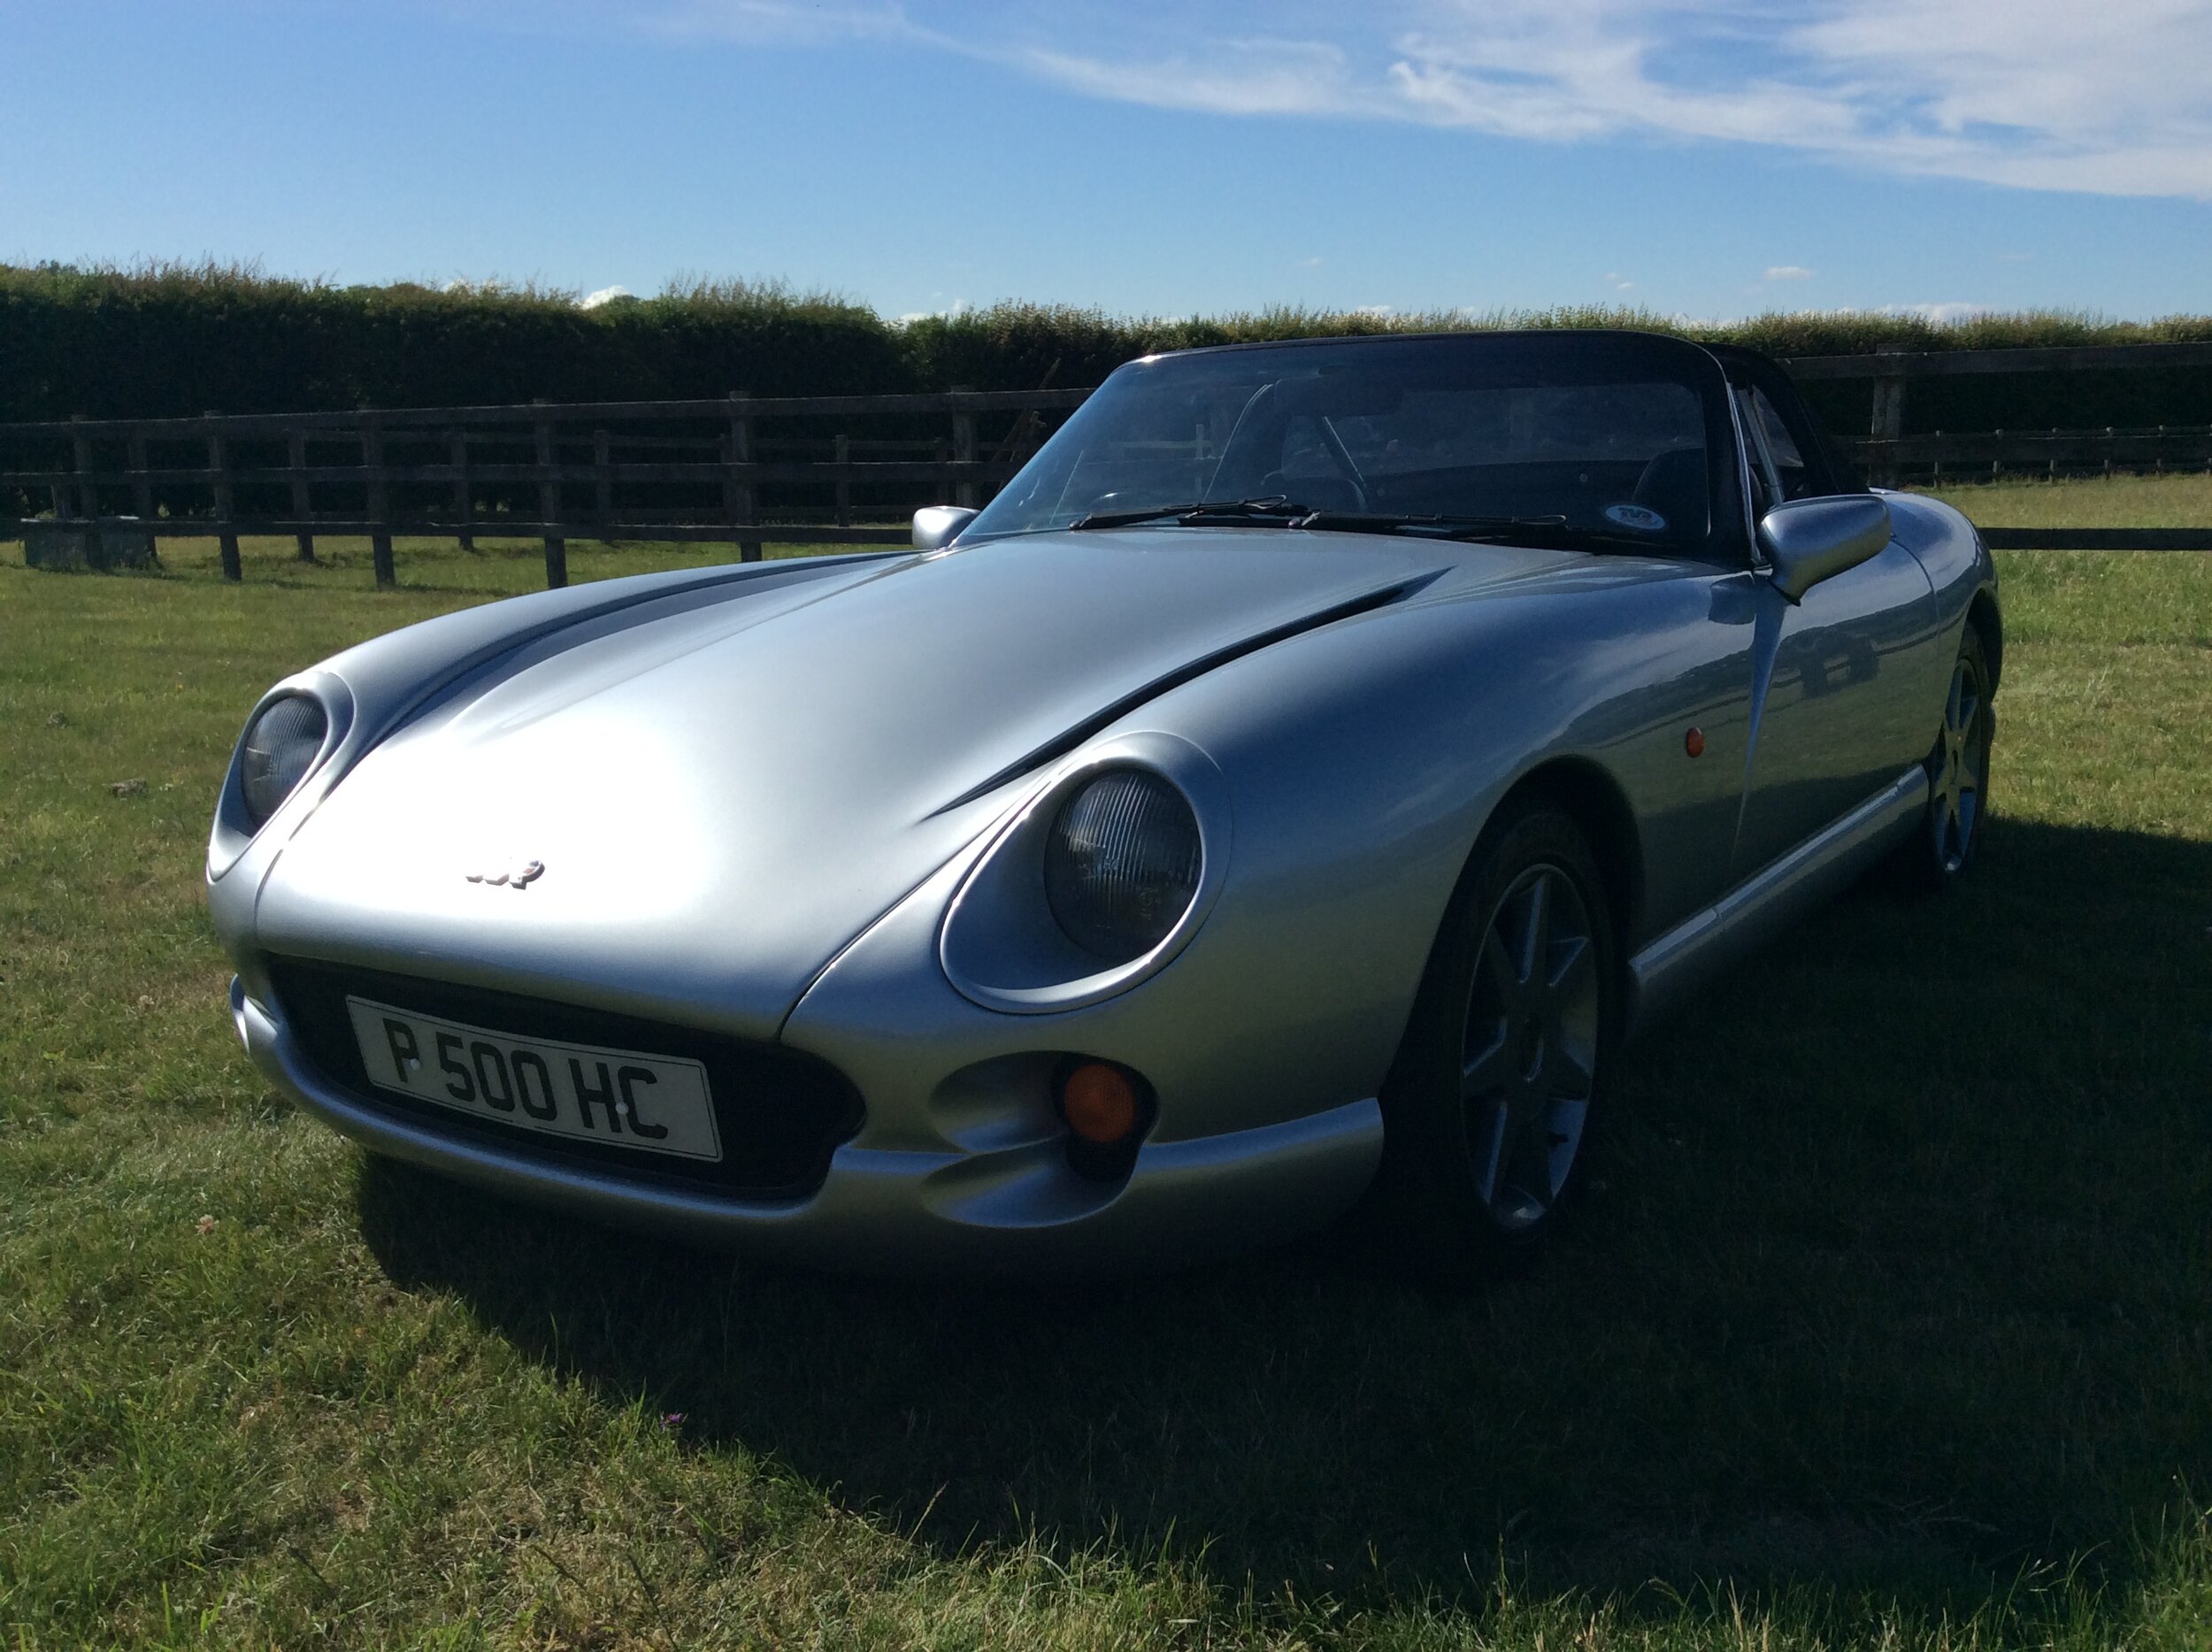 TVR Chimaera 5.0 HC - new out riggers